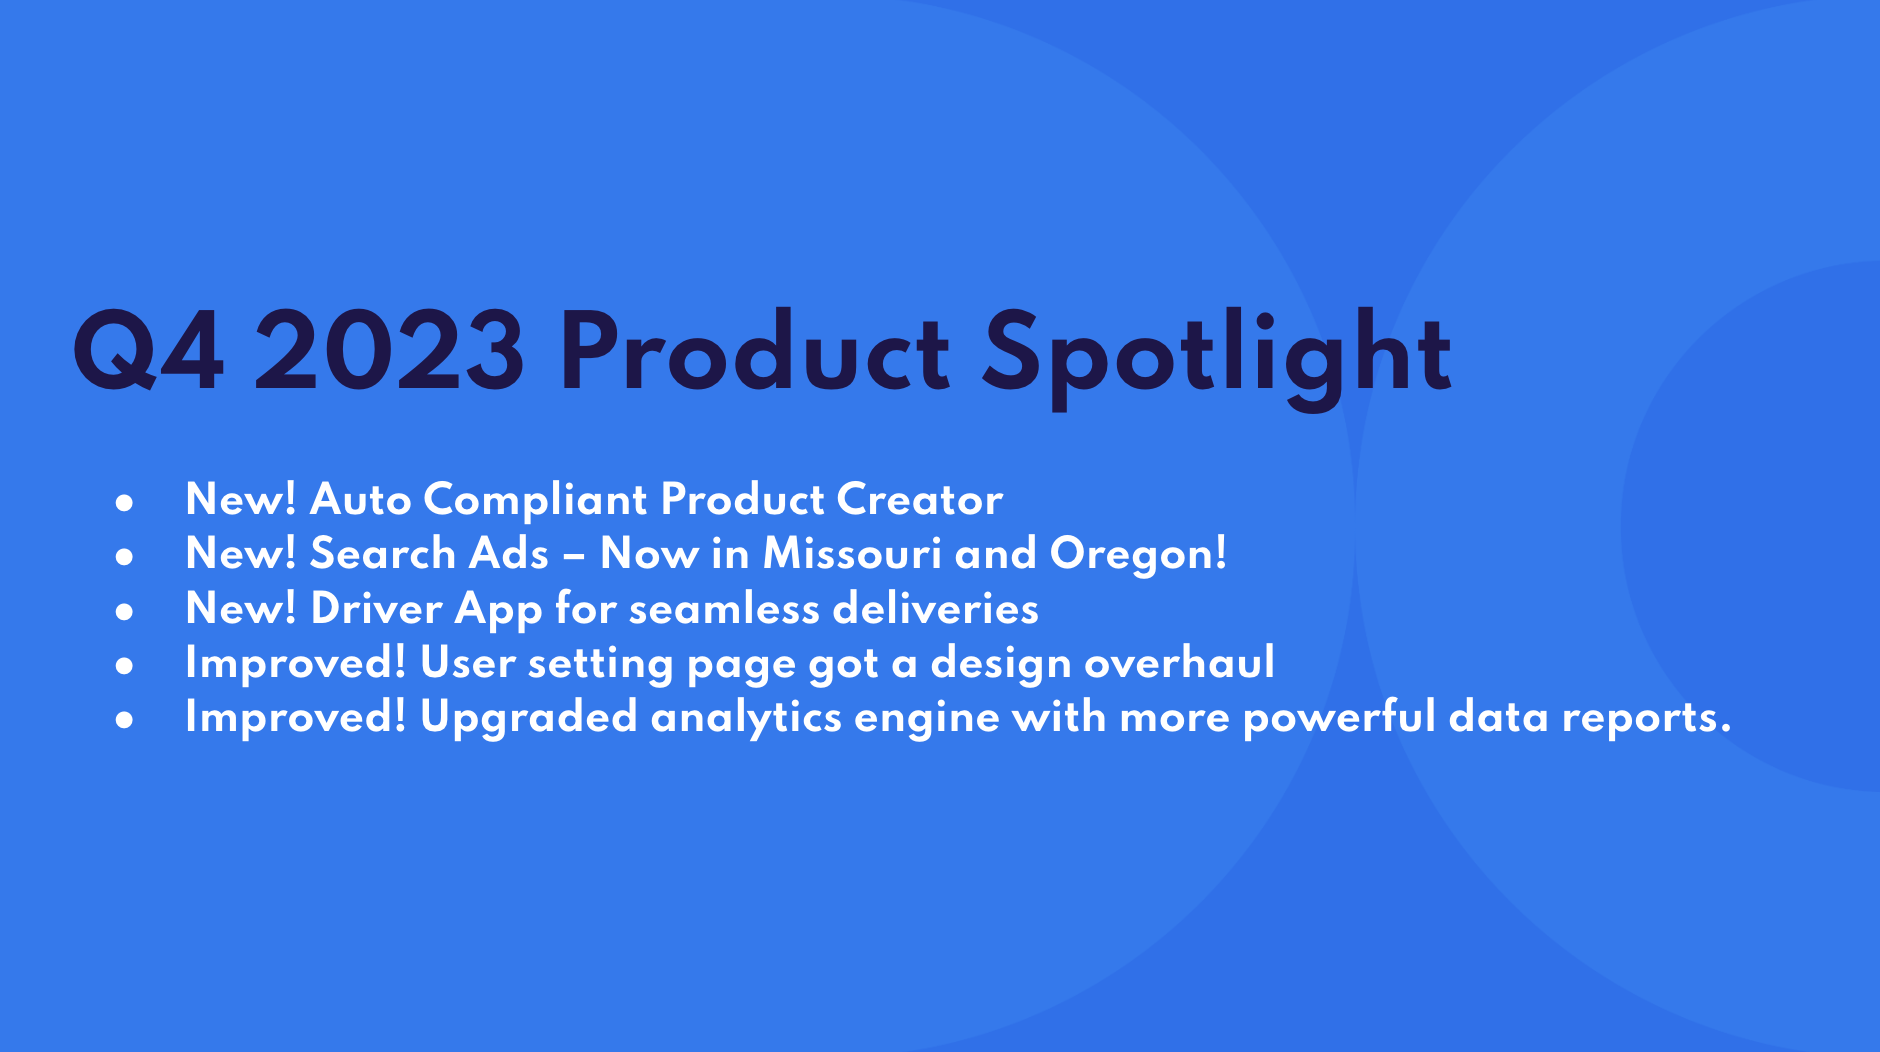 Q4 2023 Product Spotlight: New Features, Upgrades, Improvements and More!